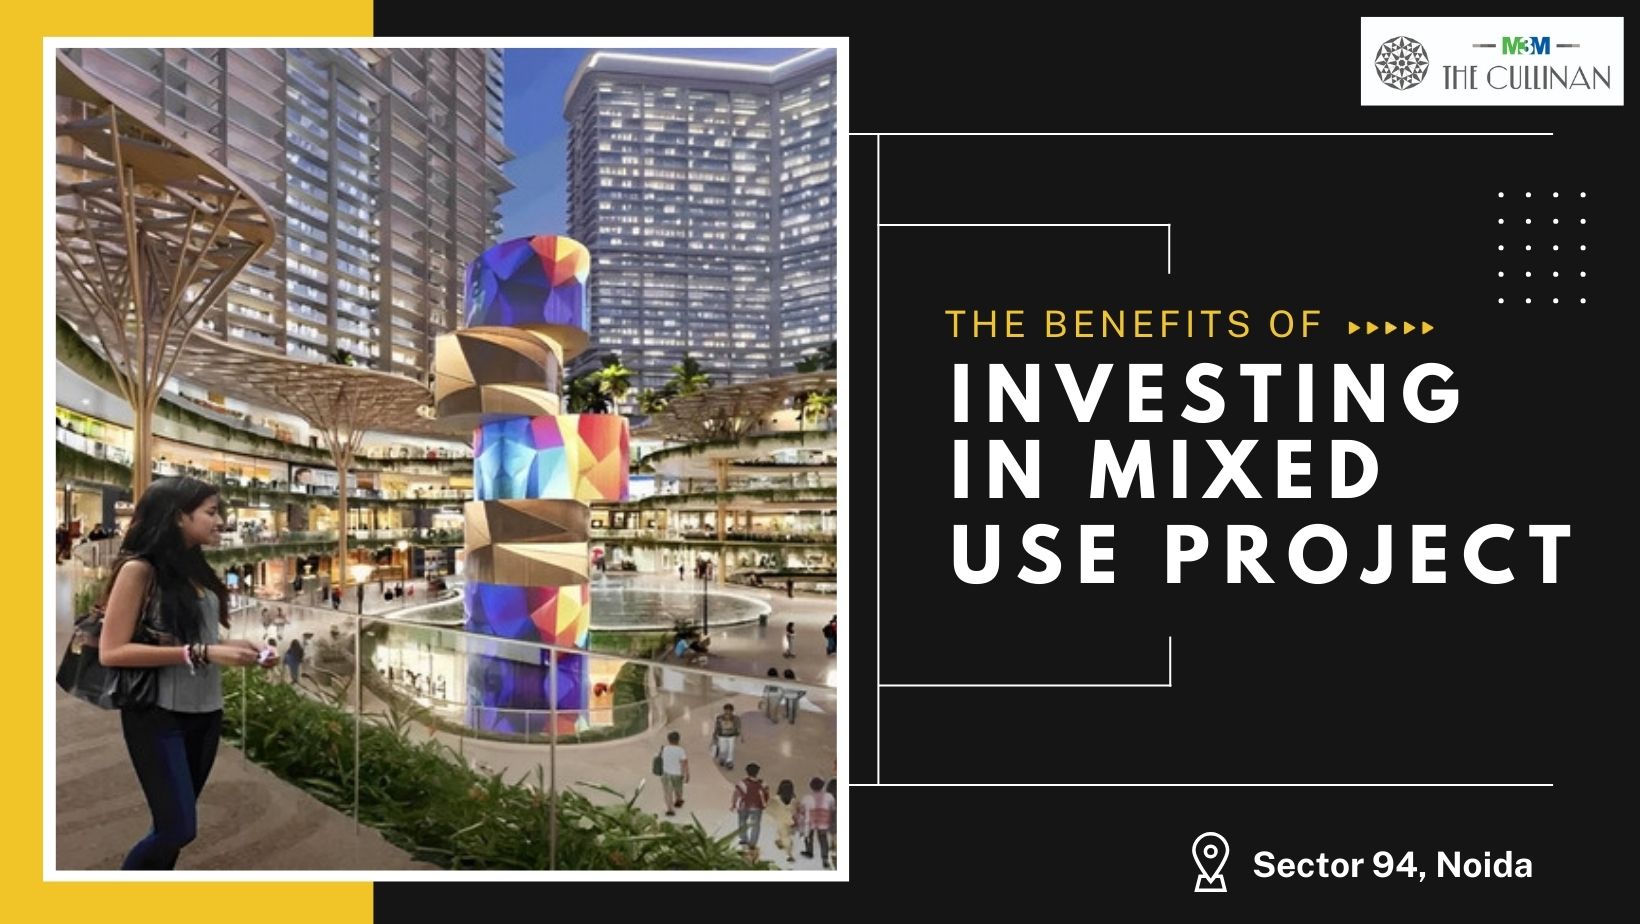 Get the benefits of investing in an attractive Mixed-use project - M3M The Cullinan